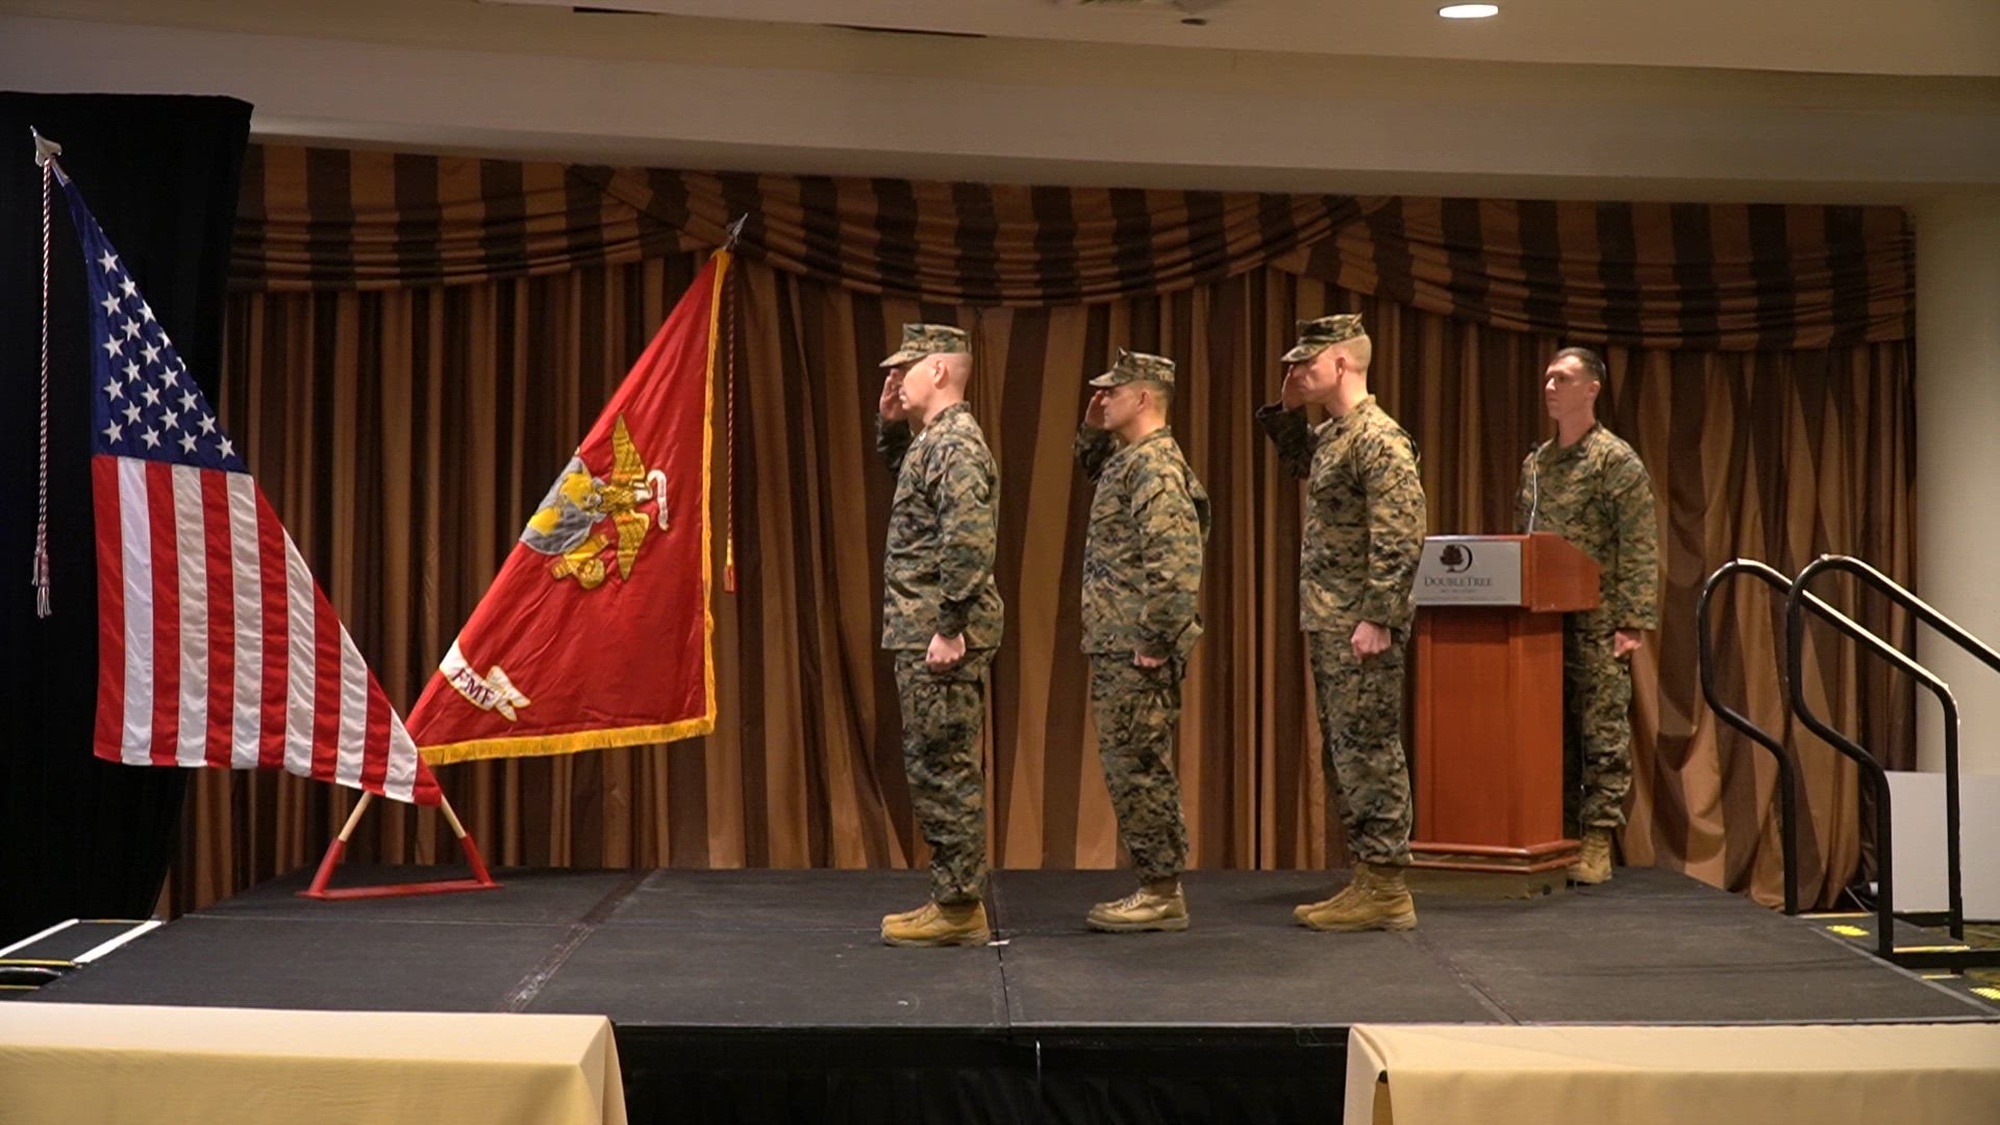 U.S. Marines with the Marine Innovation Unit (MIU), U.S. Marine Corps Forces Reserve, participate in a Senior Enlisted Advisor Post and Relief Ceremony in Arlington, Virginia, March 1, 2024. The Post and Relief Ceremony serves as the official changeover between the unit's senior enlisted advisors, honoring U.S. Marine Corps Sgt. Maj. Robert Lusk, outgoing senior enlisted advisor with MIU, while offering the opportunity for Master Gunnery Sgt. David Arellano, incoming senior enlisted advisor with MIU, to introduce himself to the Marines now under his charge. Stood up in March 2022, MIU leverages existing Marine talent in order to: accelerate the adoption of advanced capabilities; transform Naval Service capacity for technology employment; and retain and invest in Total Force human capital. (U.S. Marine Corps video by Capt. Kevin P. Stapleton)